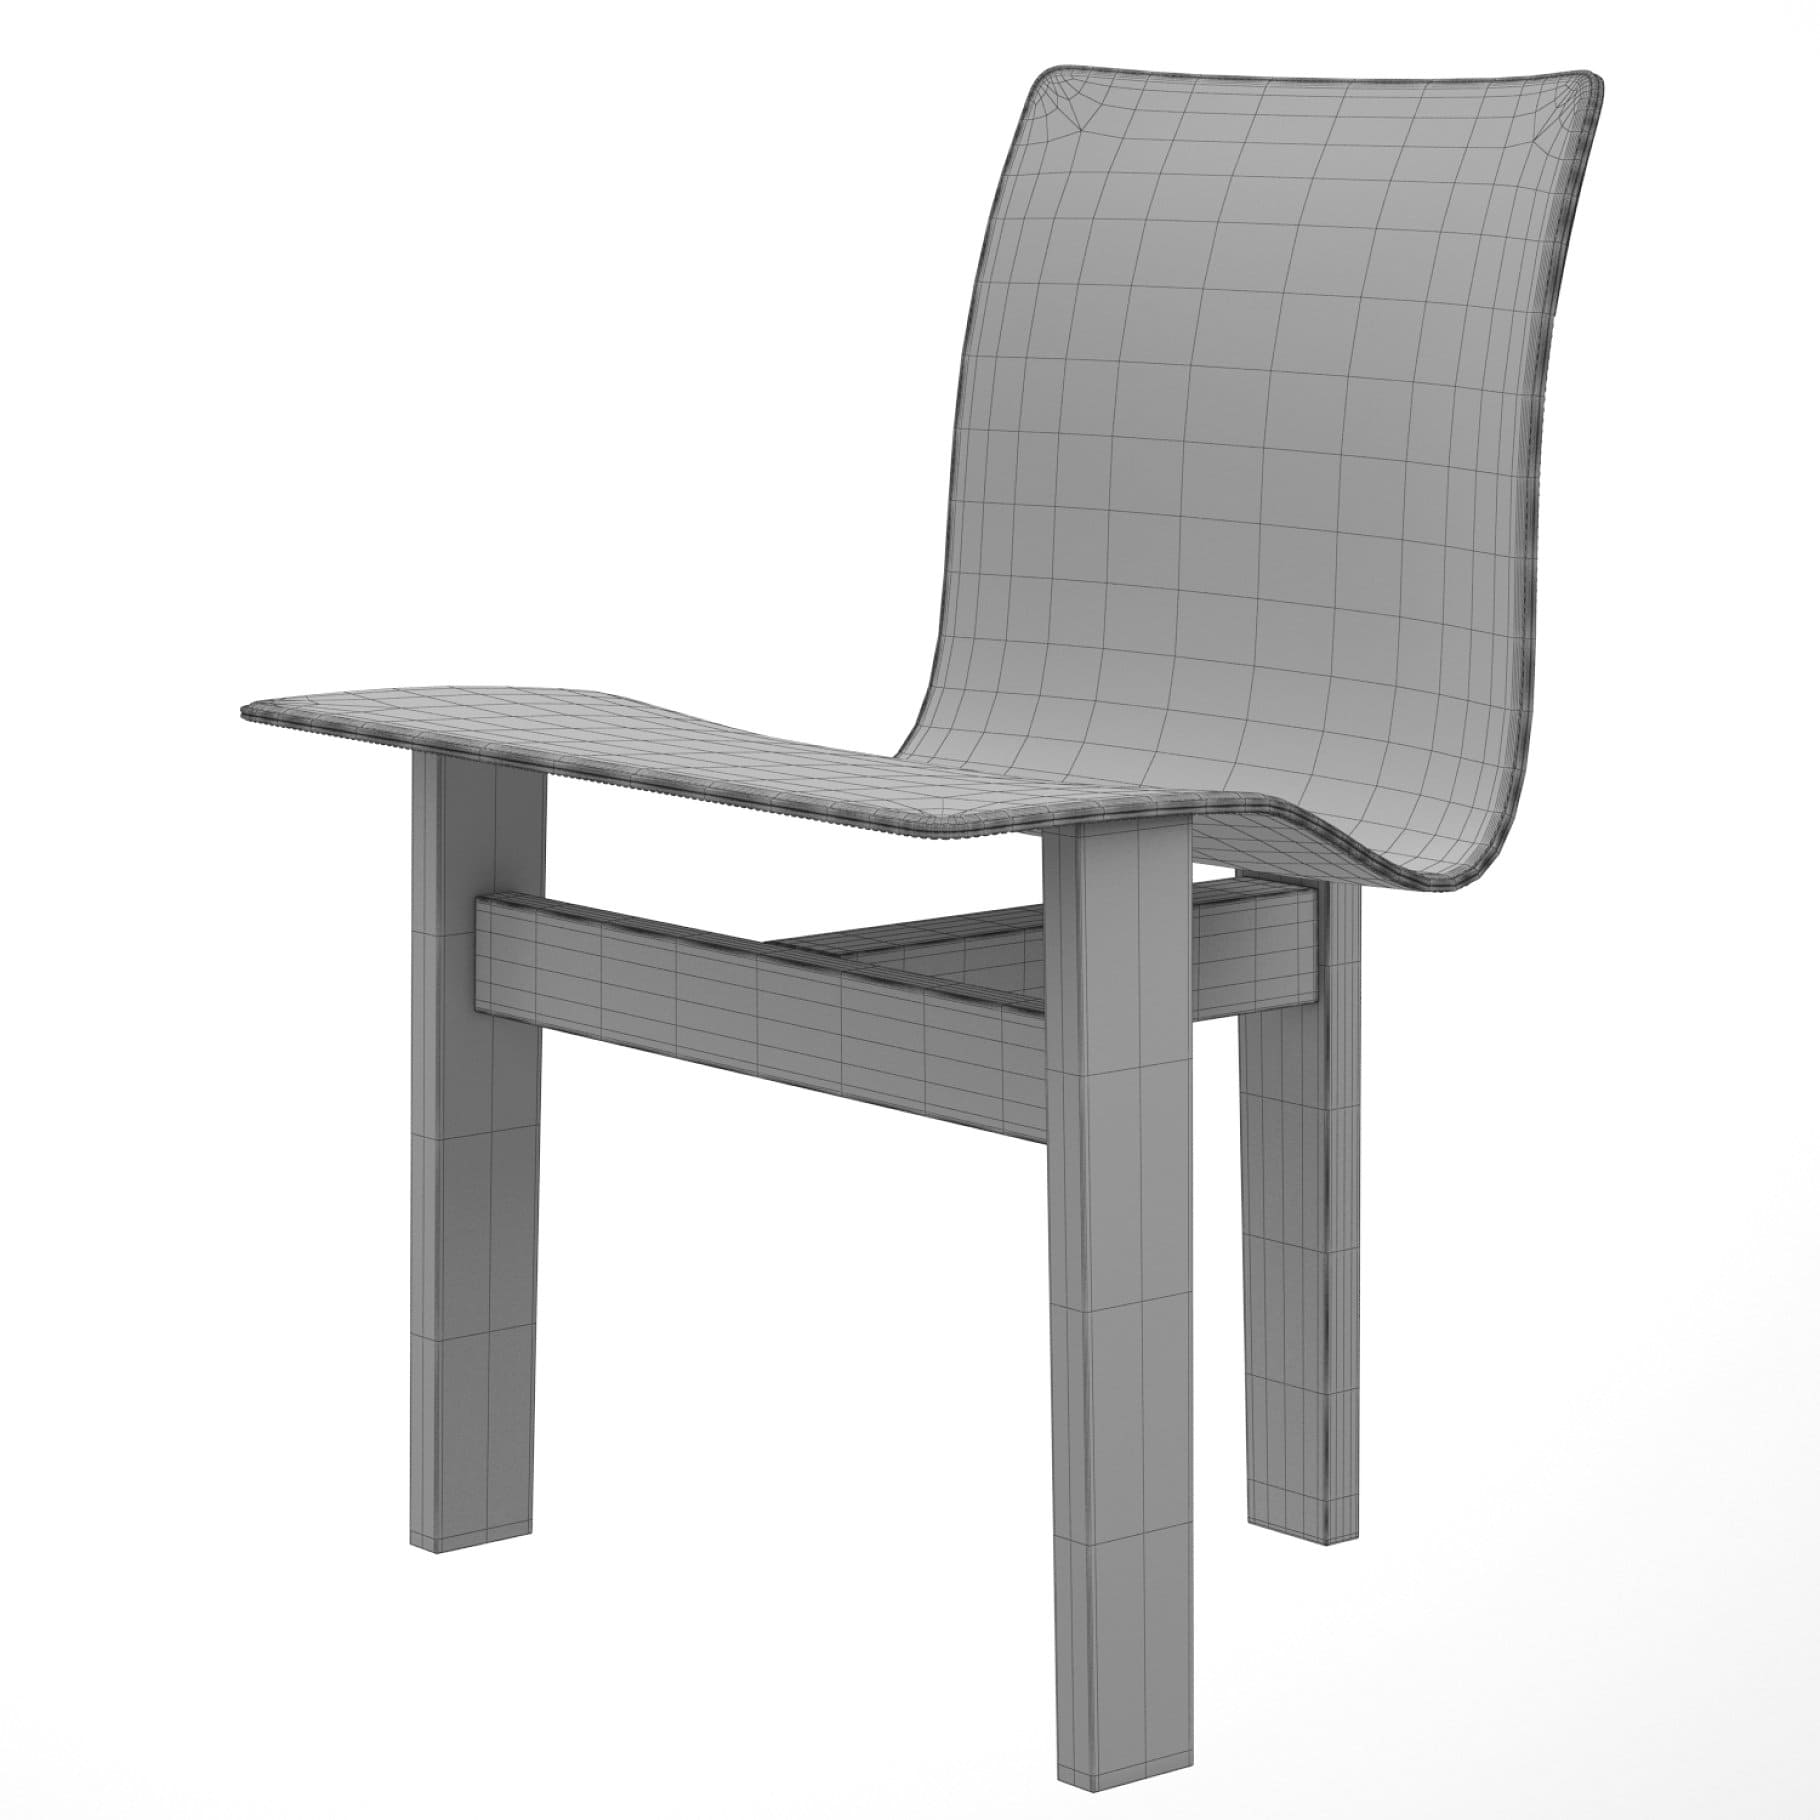 3D model of the Tre 3 wooden chair with a curved back.